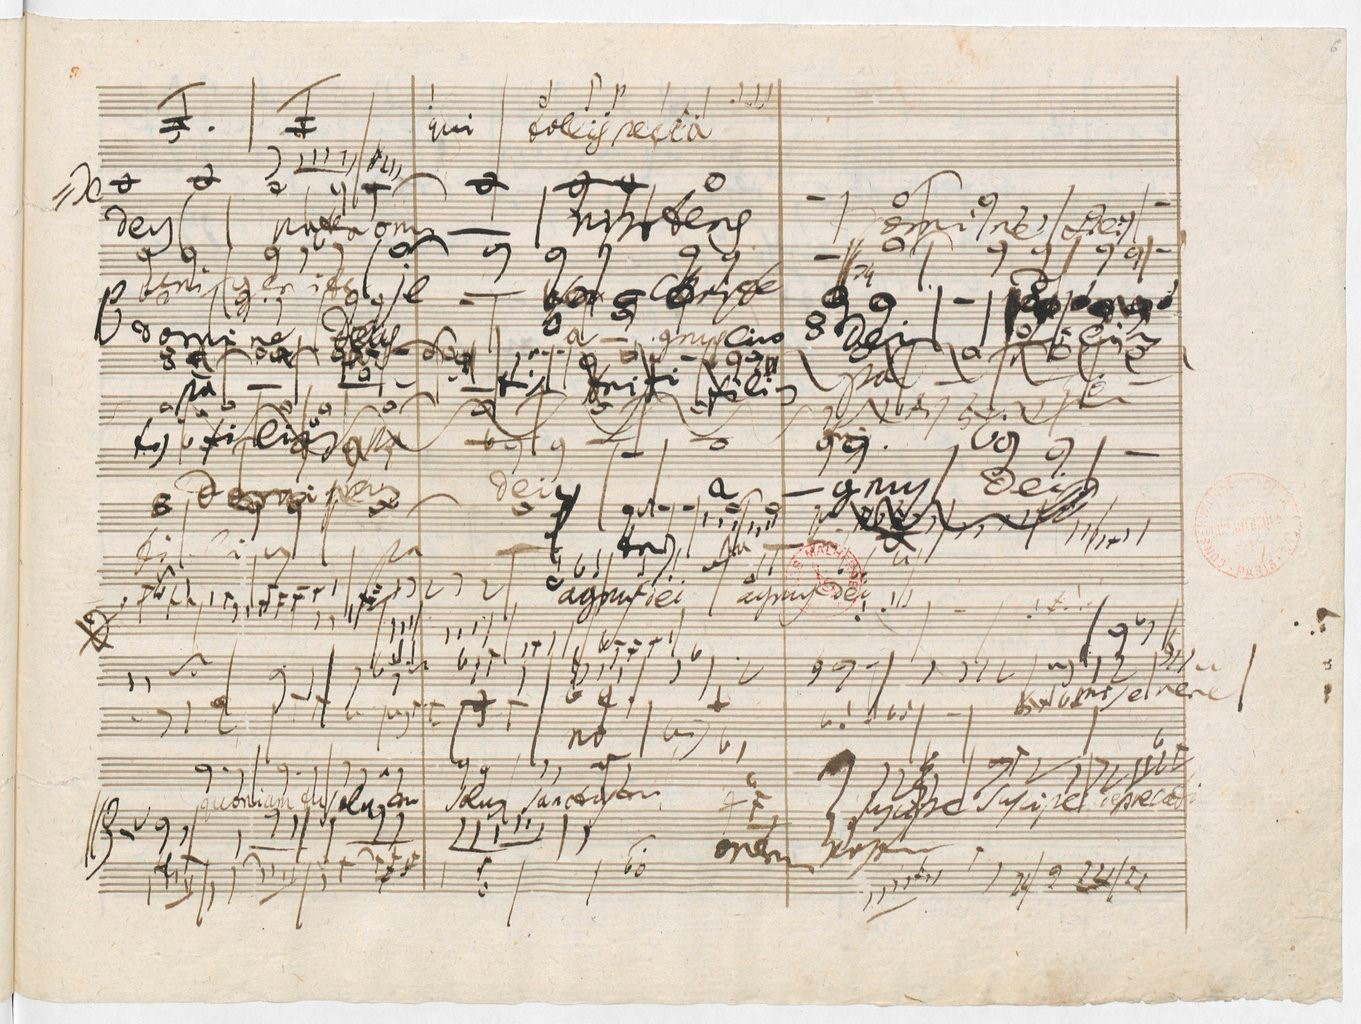 Lined paper with scribbled musical notes